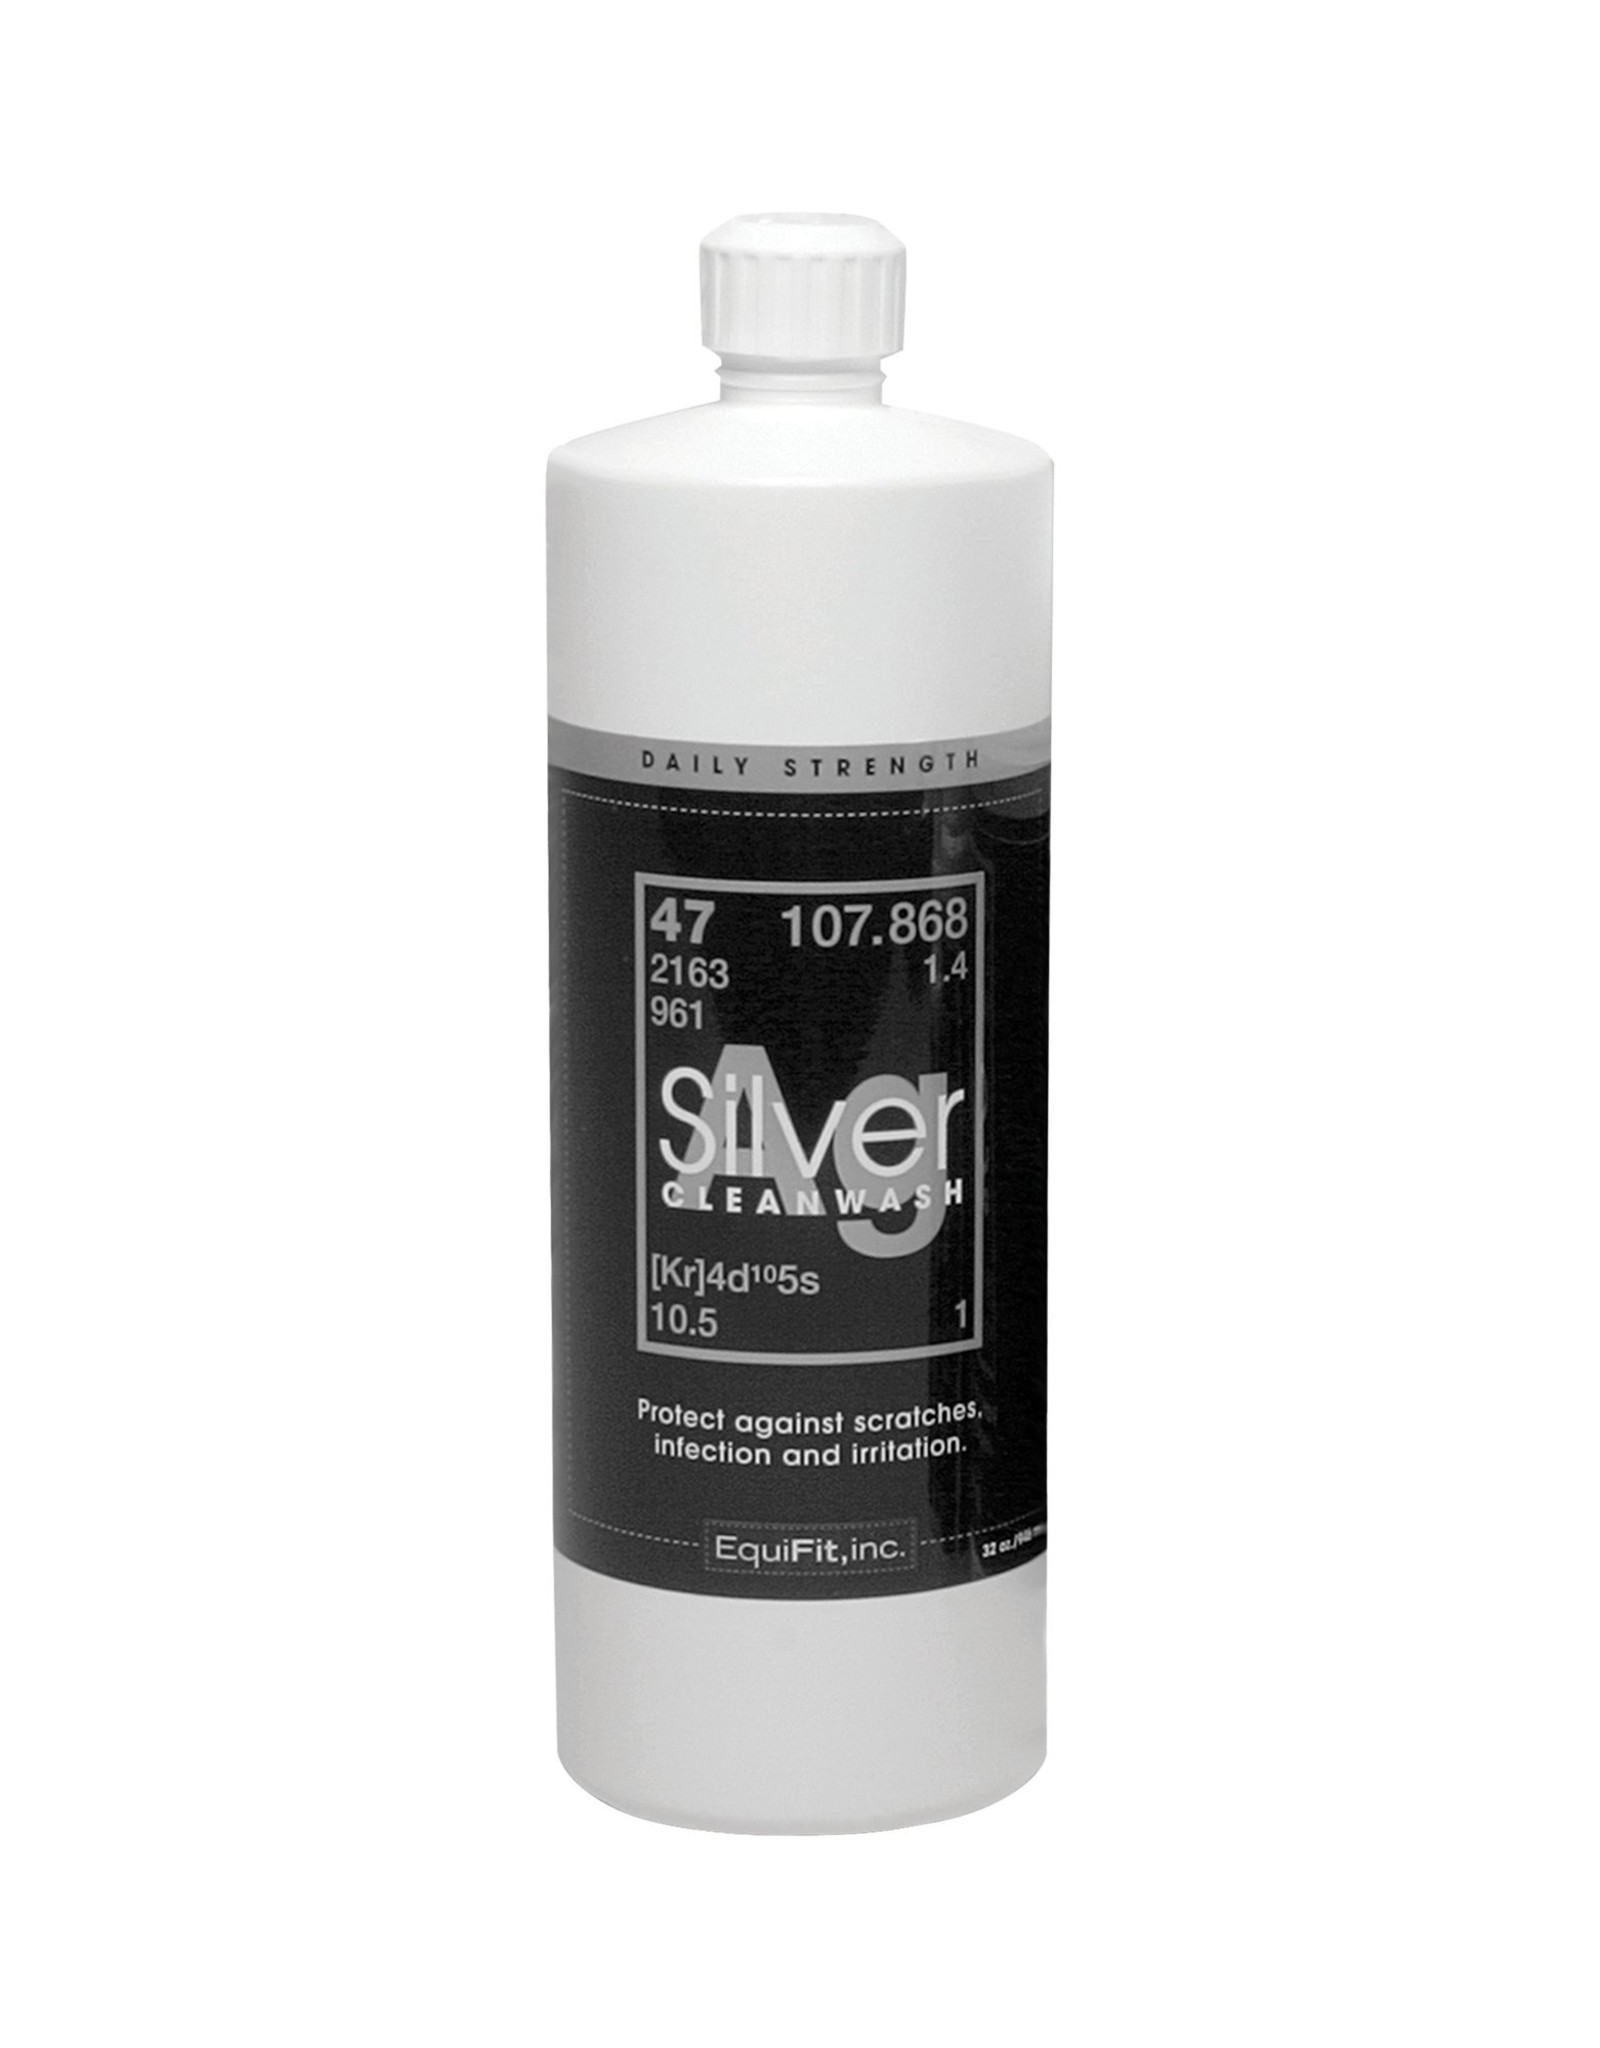 EQUIFIT AGSILVER CLEANWASH - DAILY STRENGTH 32OZ